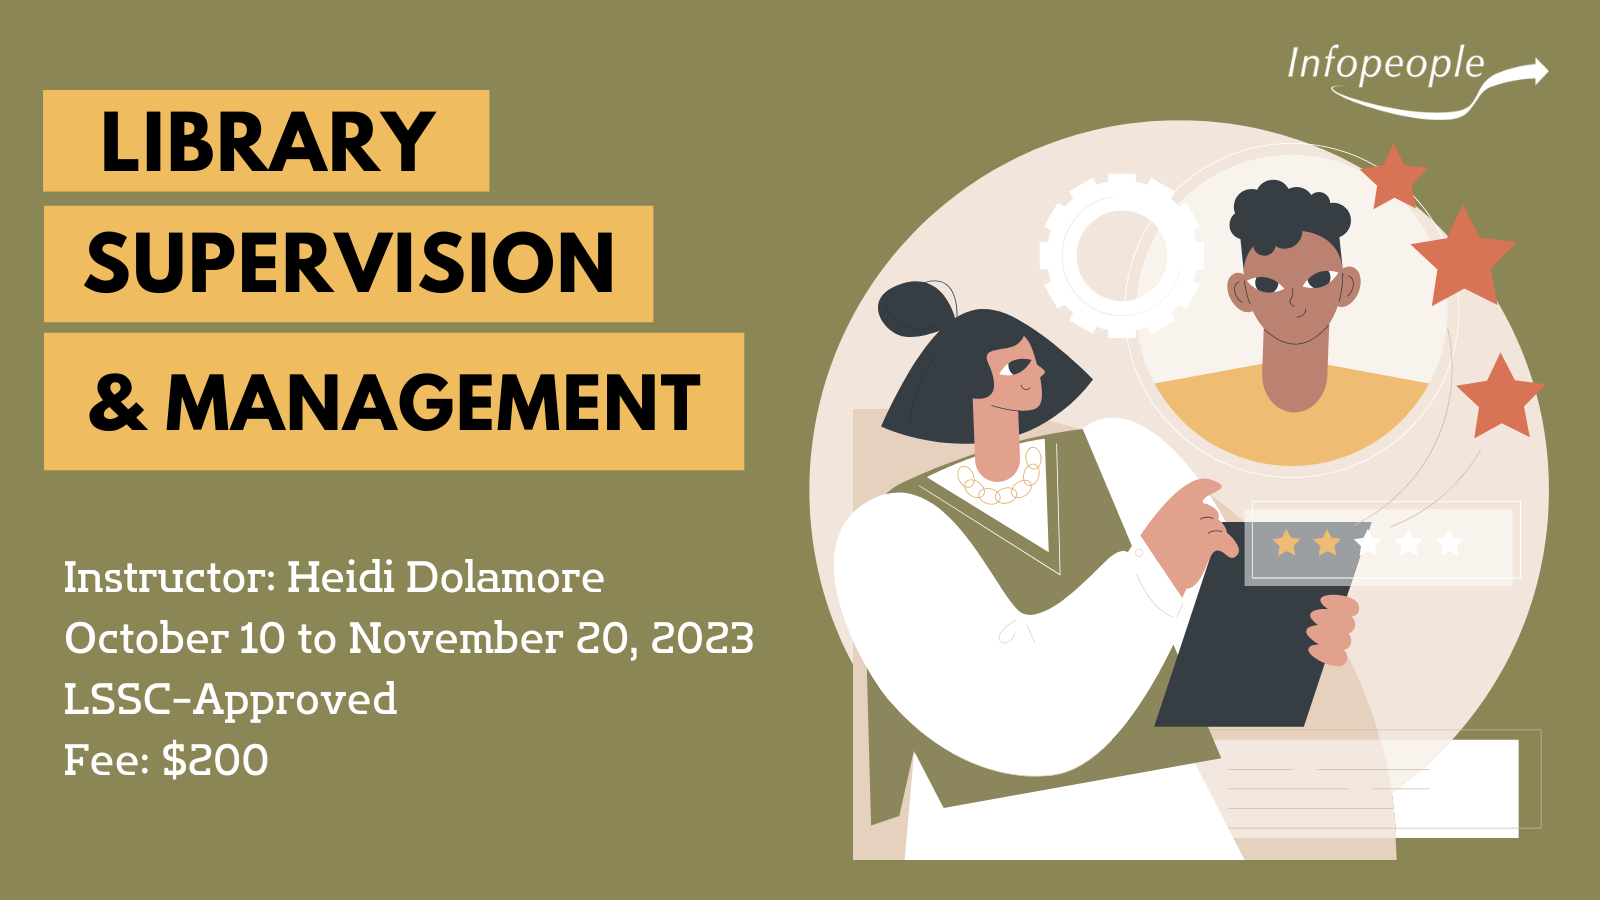 Library Supervision and Management- an Infopeople course. October 10 to November 20, 2023. LSSC-approved. Instructor: Heidi Dolamore. Fee: $200. A woman, holding a clipboard, is rating and reviewing an employee.